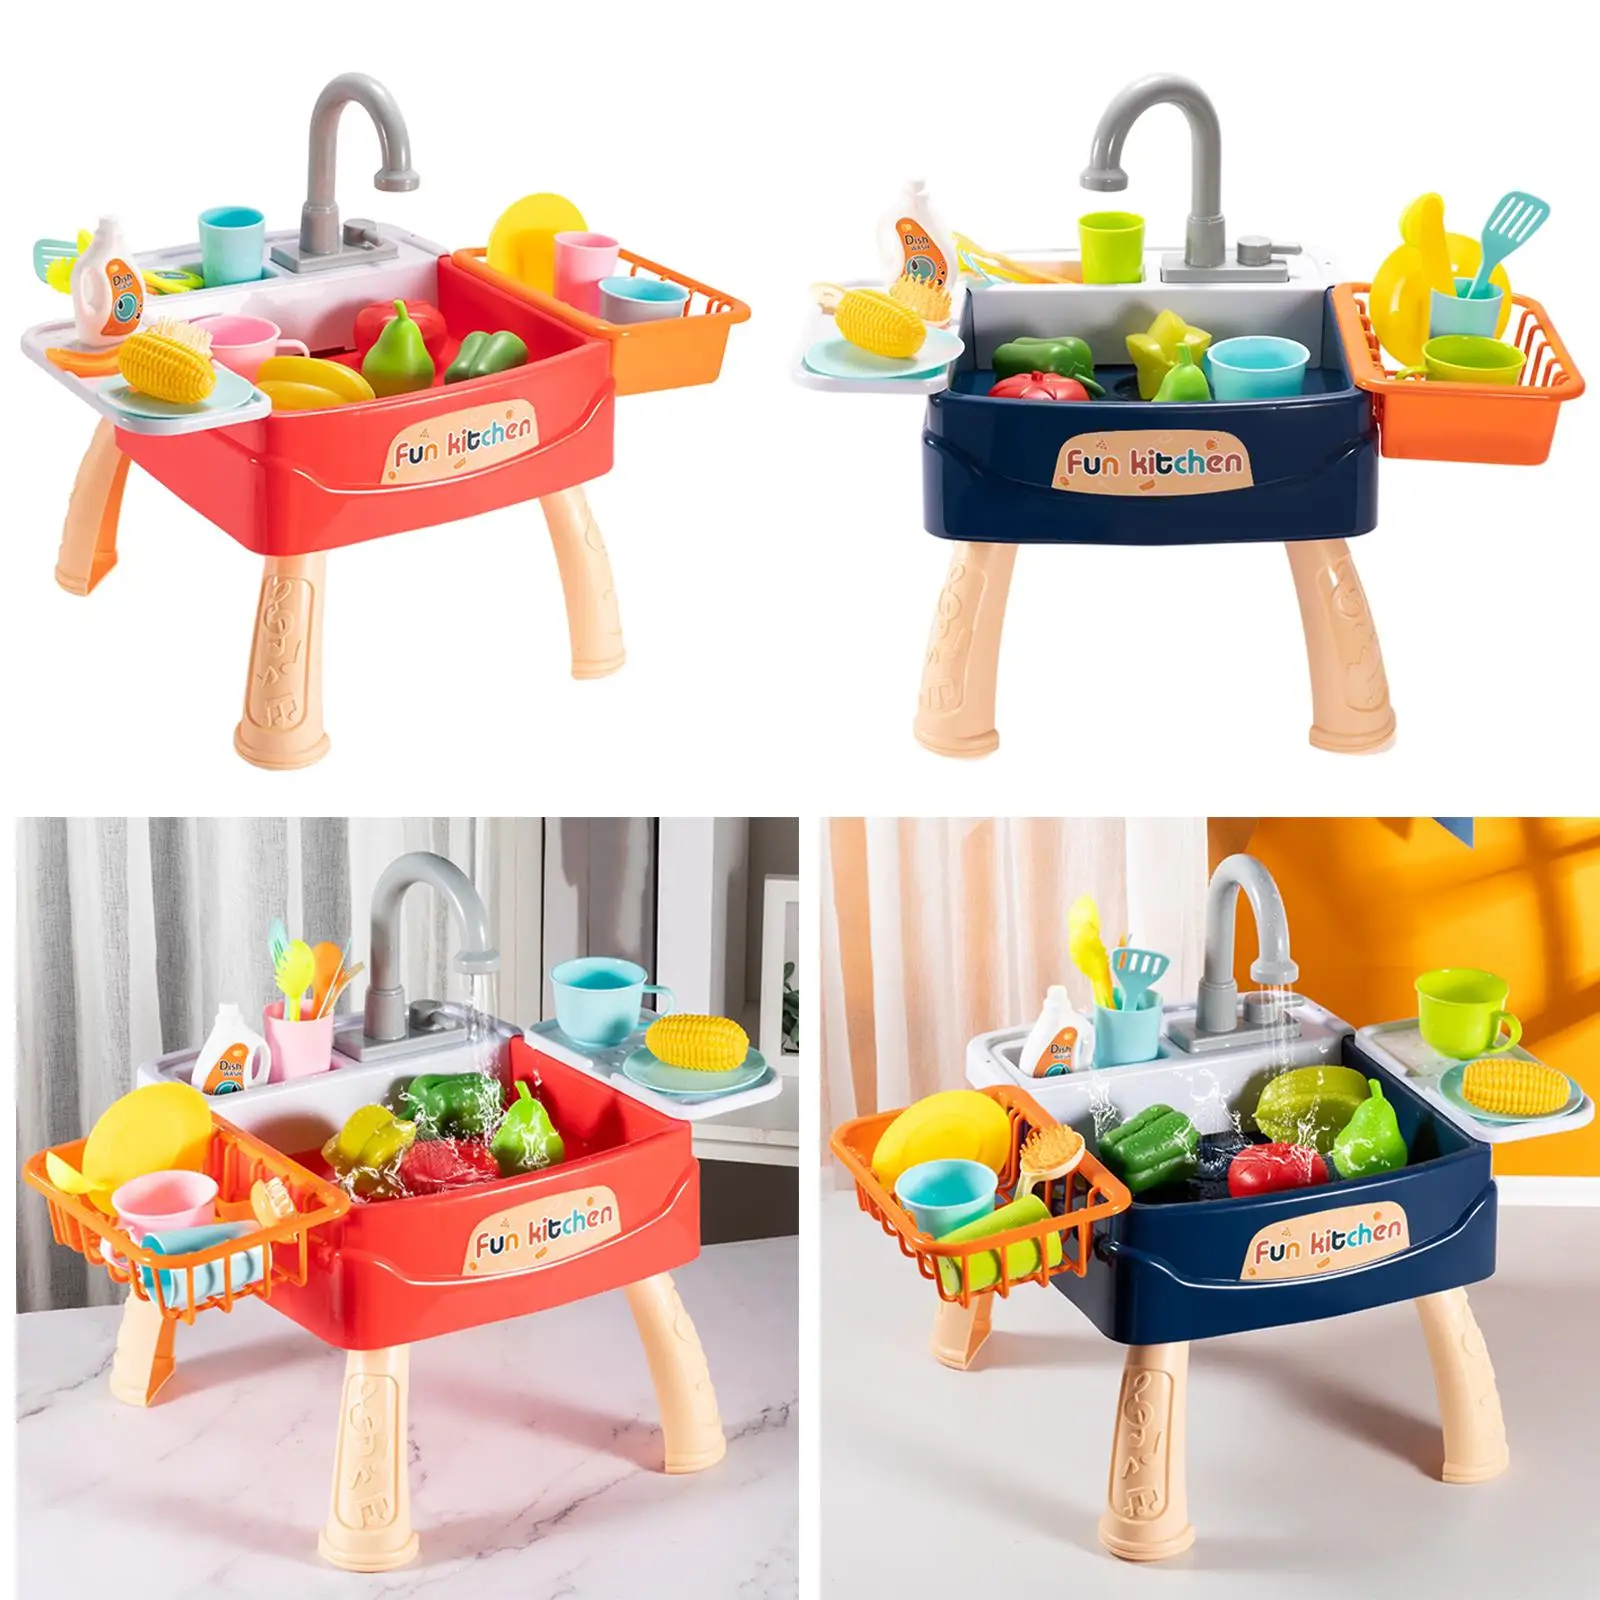 Automatic Children Simulation Kitchen Toys Sink Toys Playhouse Pretend Play Activity Fruits And Vegetables Dishes Sink Set